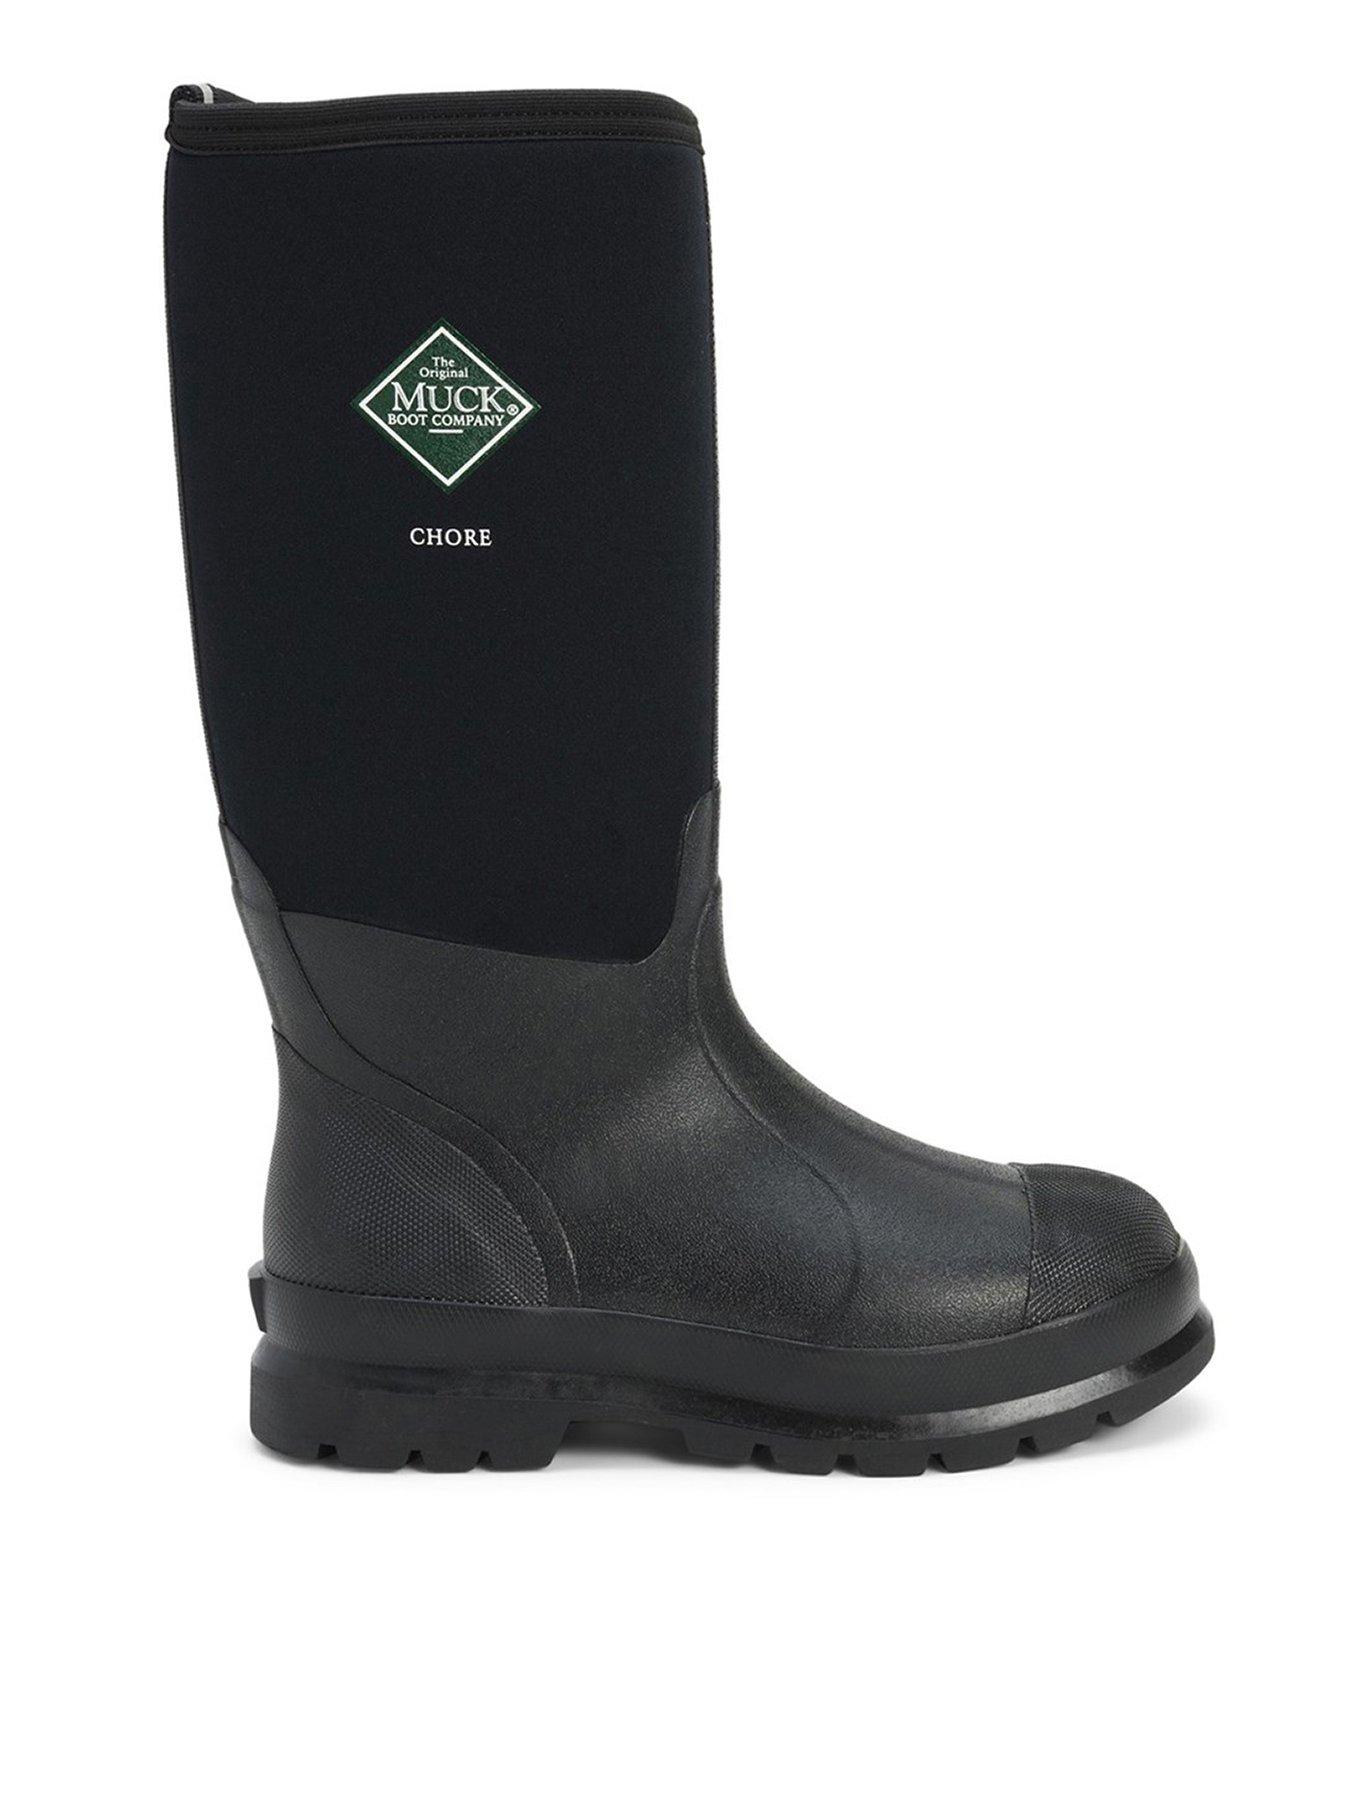 Muck Boots Mens Chore Classic High - Black | Very.co.uk